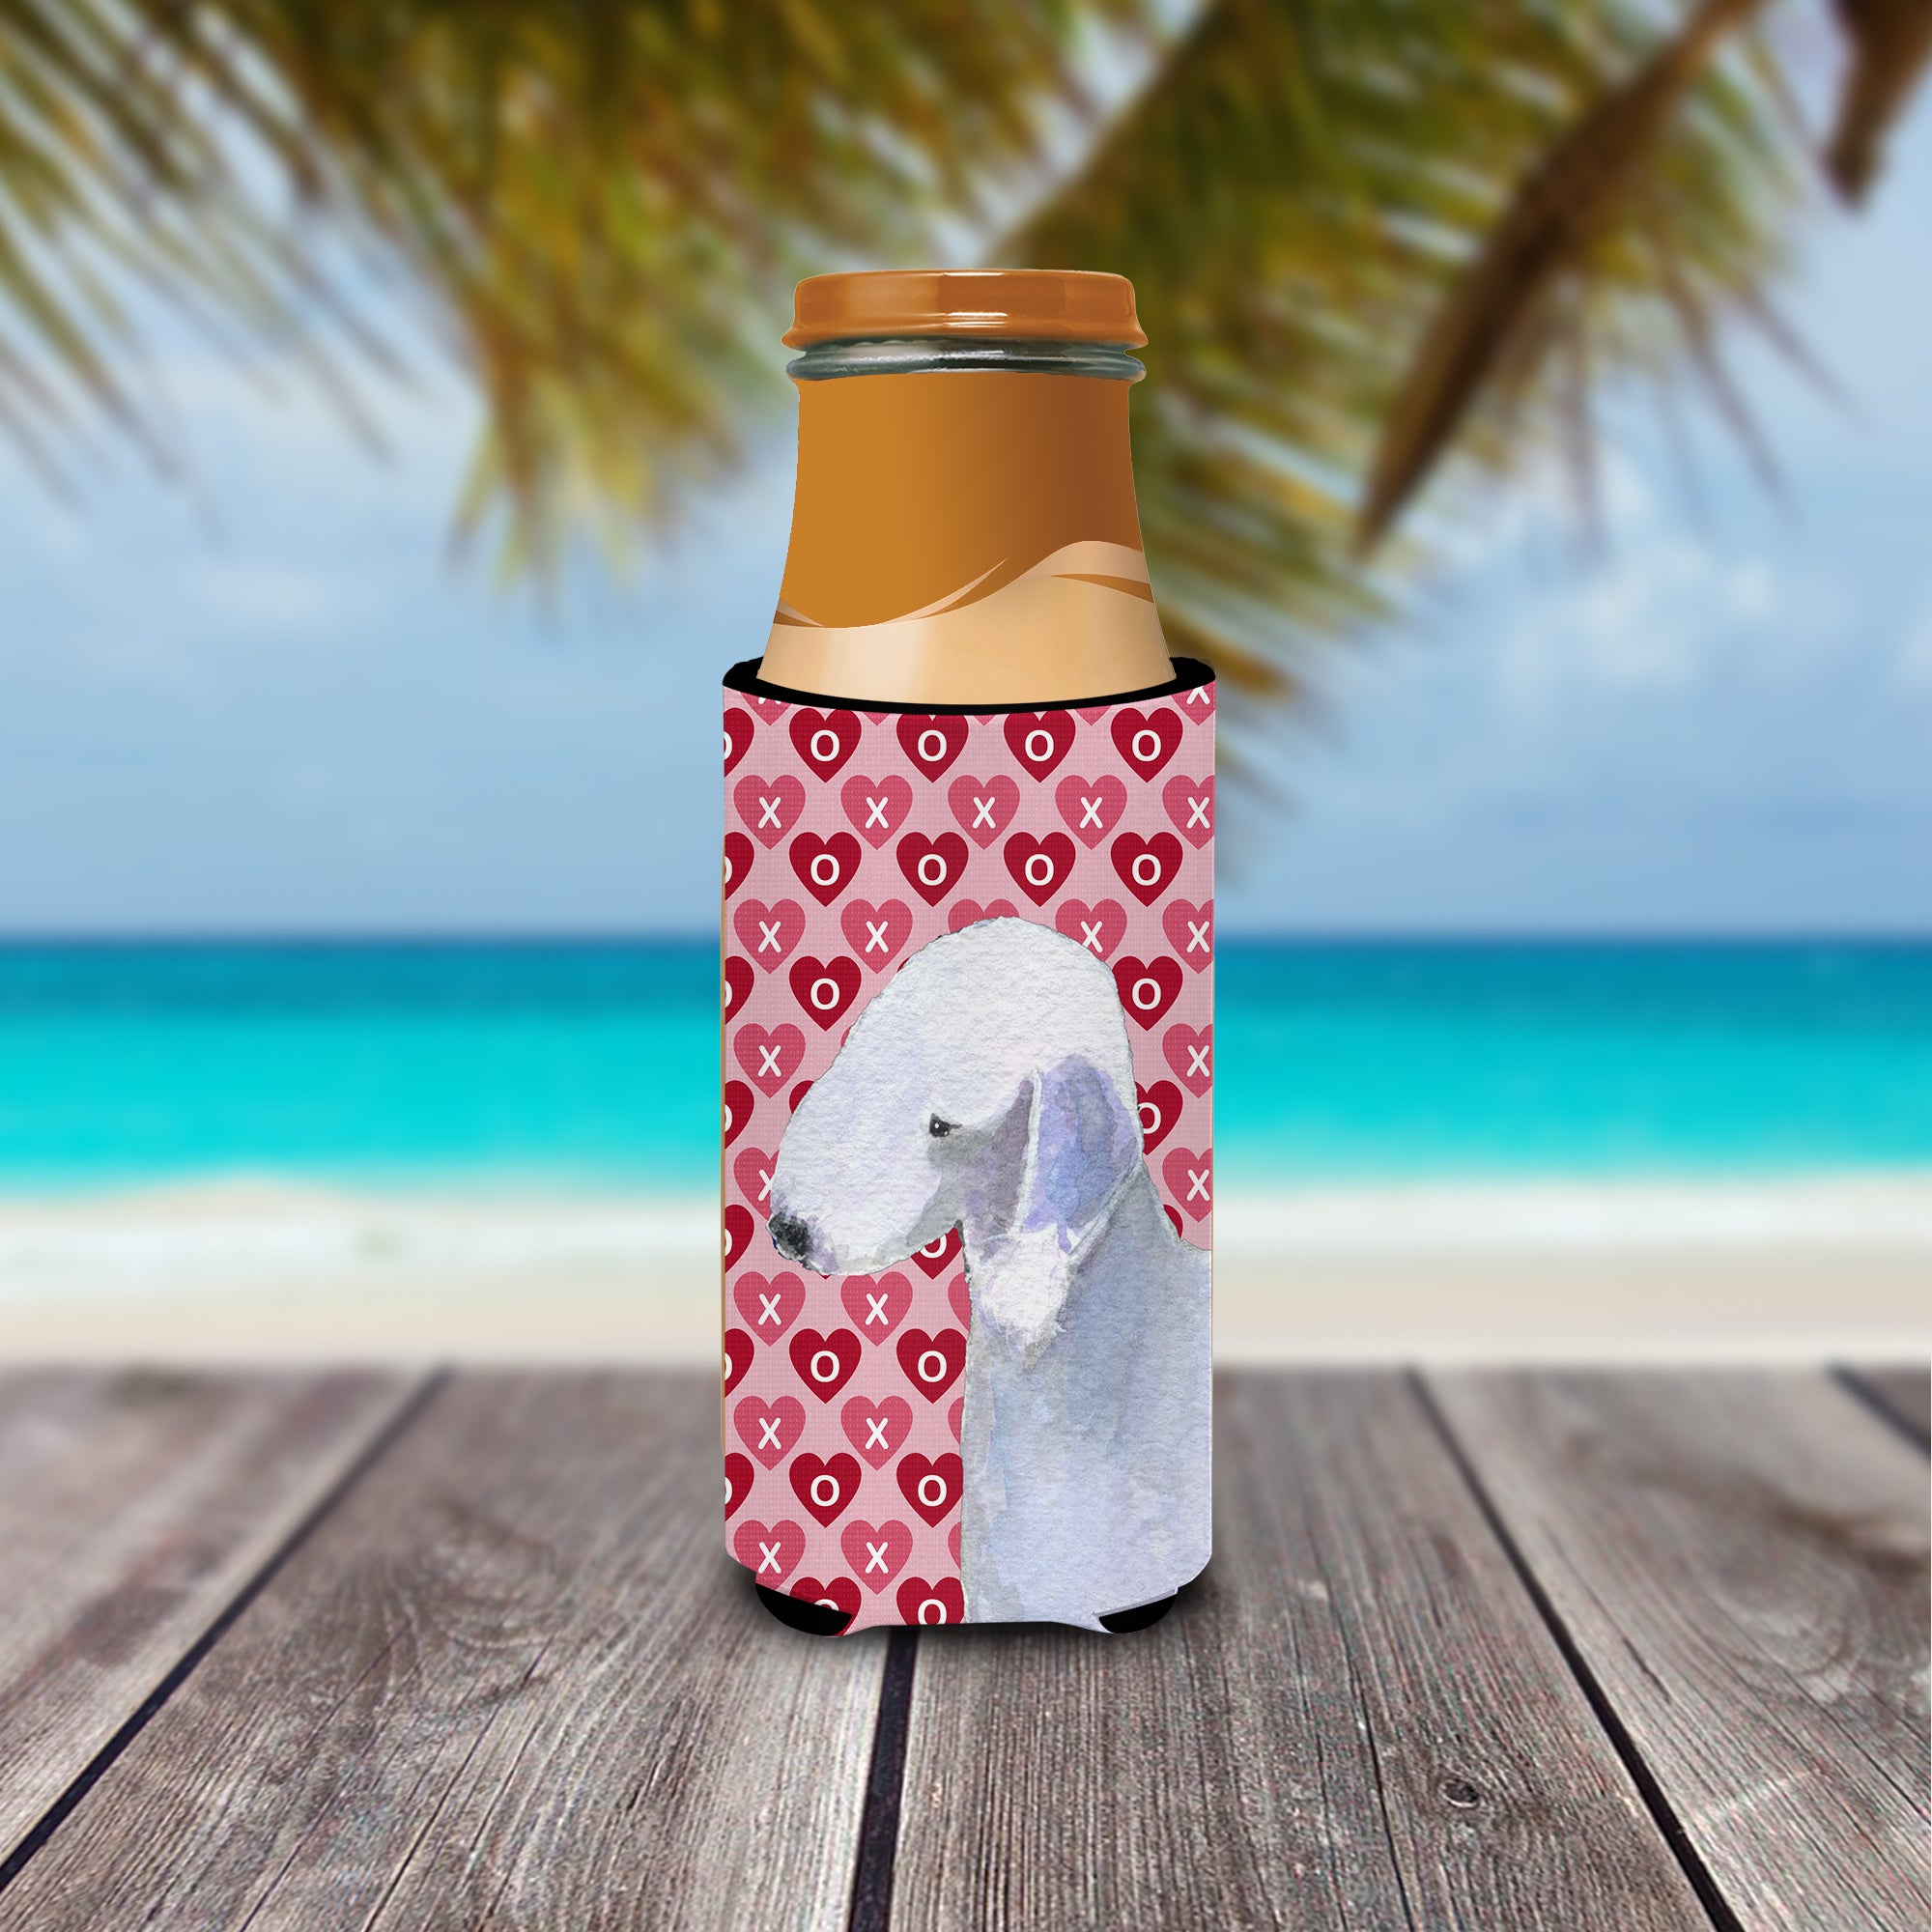 Bedlington Terrier Hearts Love and Valentine's Day Portrait Ultra Beverage Insulators for slim cans SS4483MUK